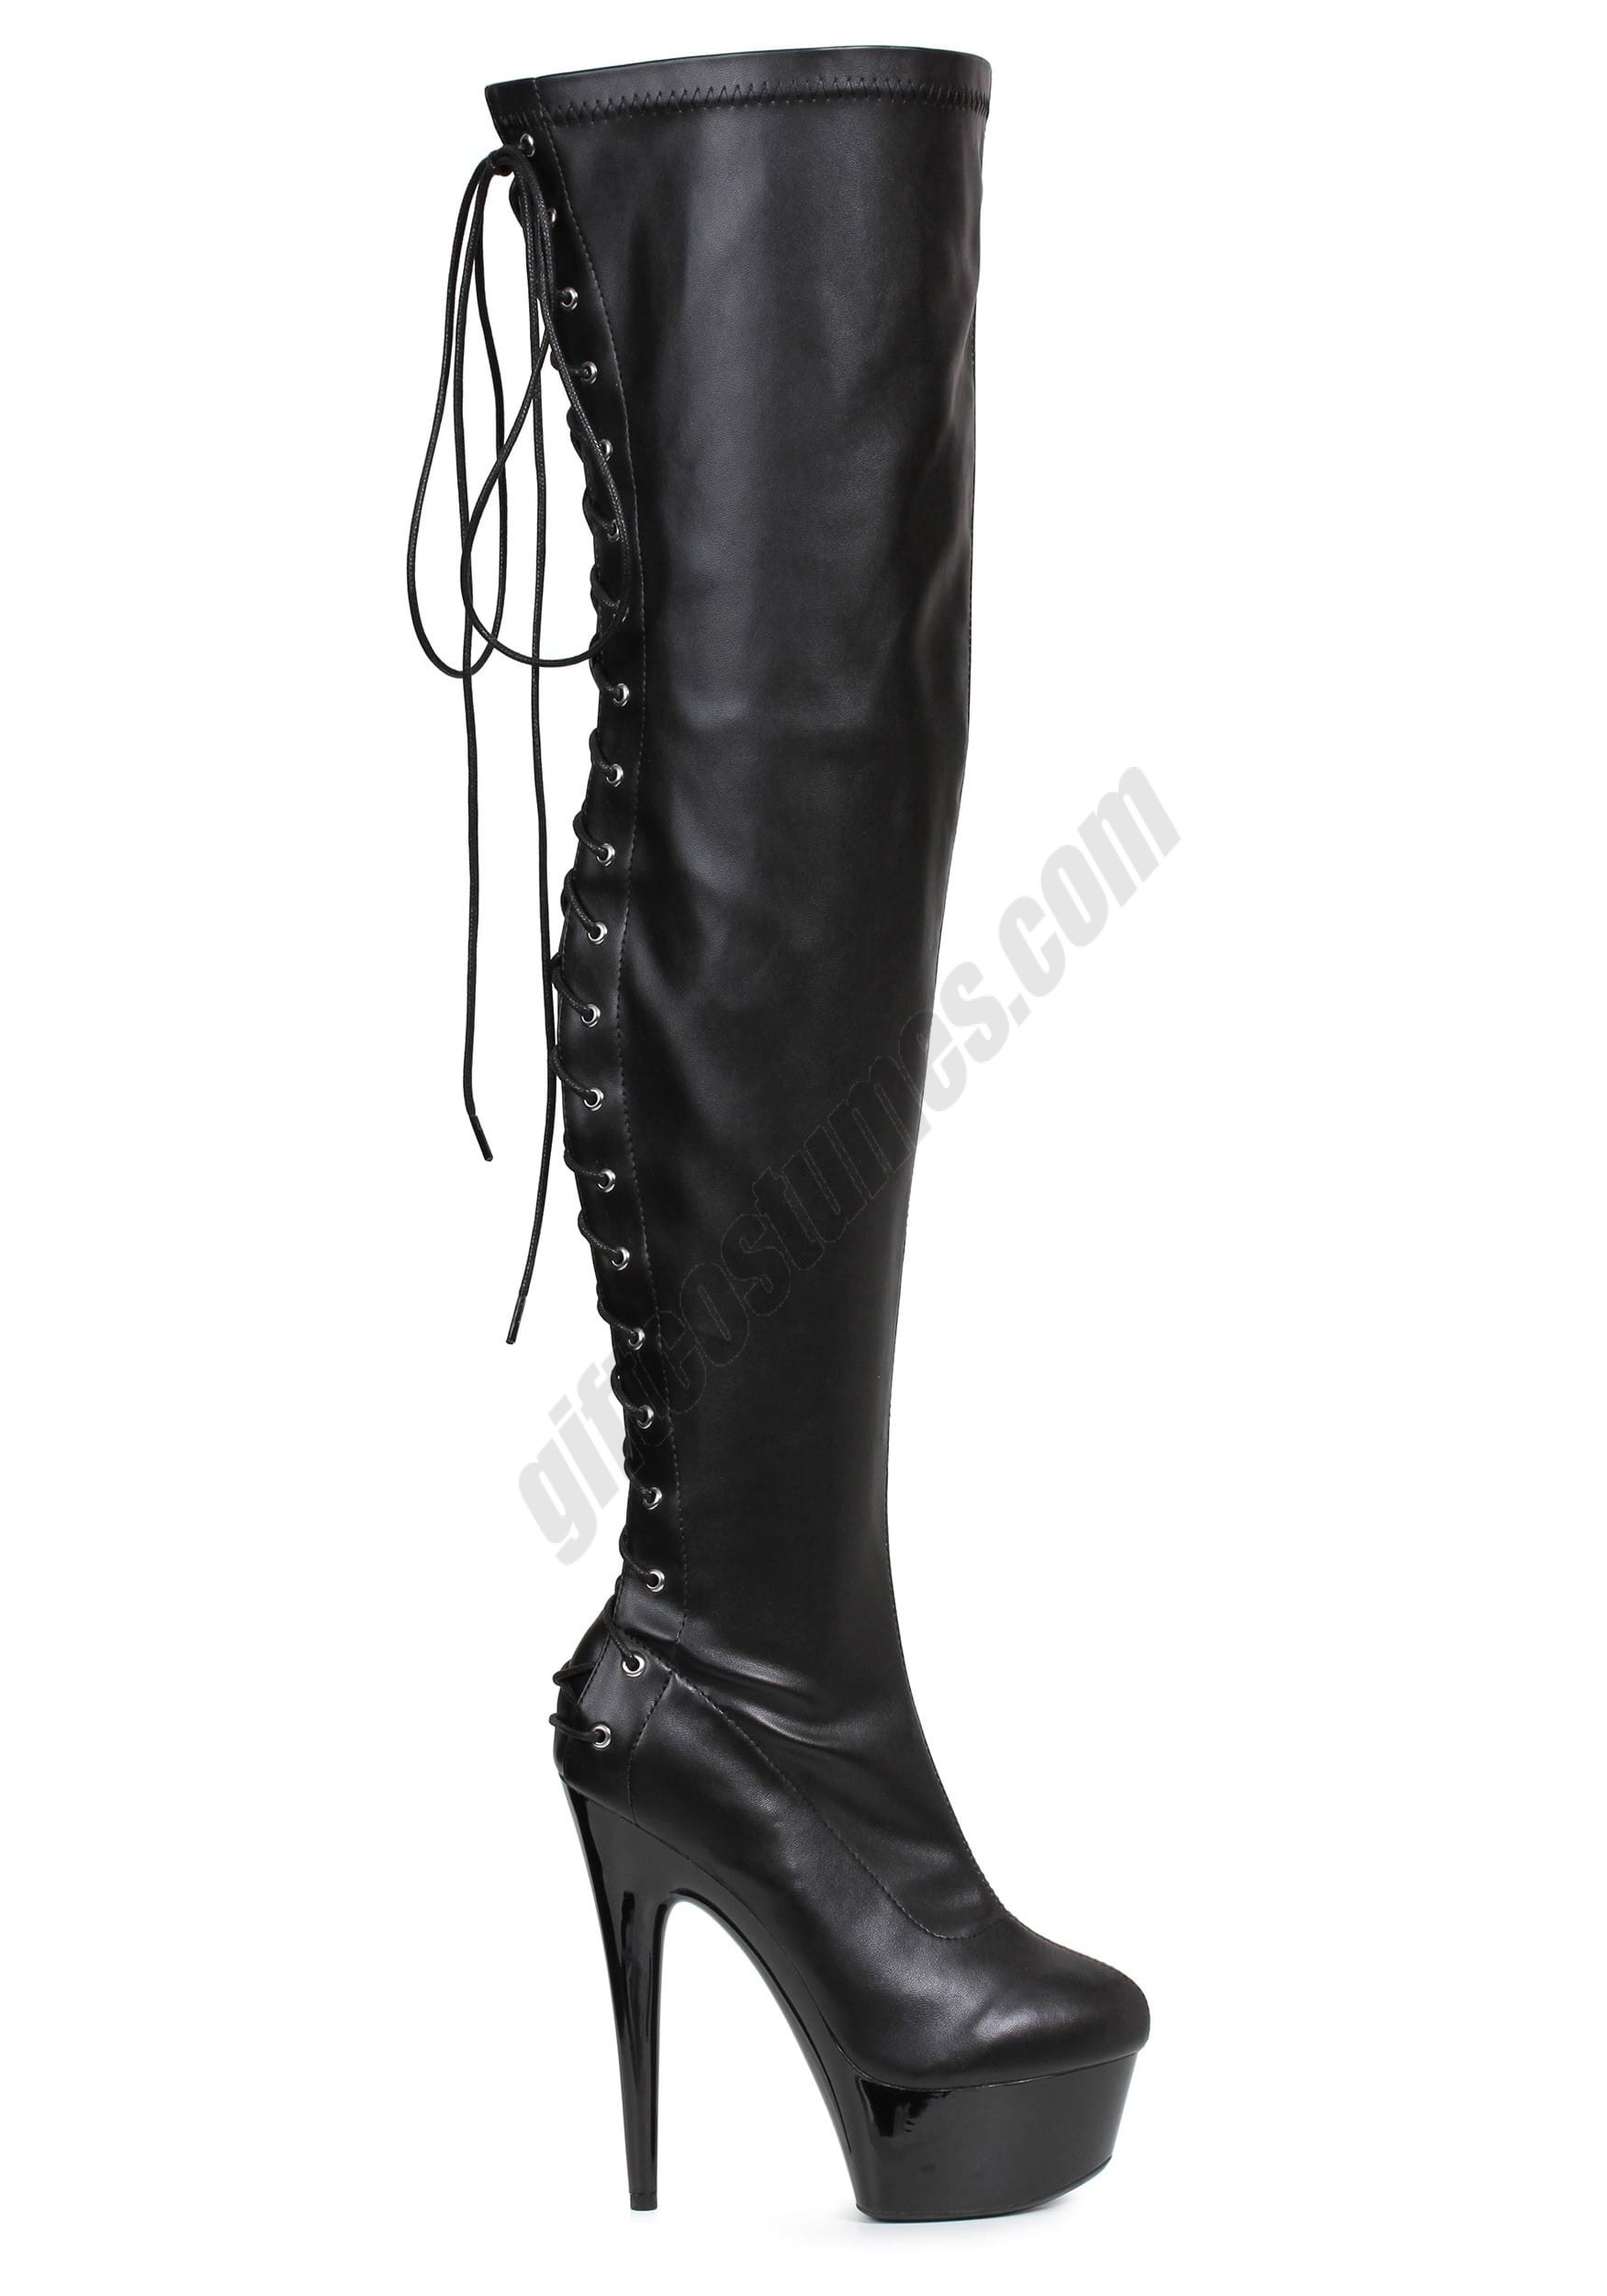 Black Lace Thigh High Boots for Women Promotions - Black Lace Thigh High Boots for Women Promotions